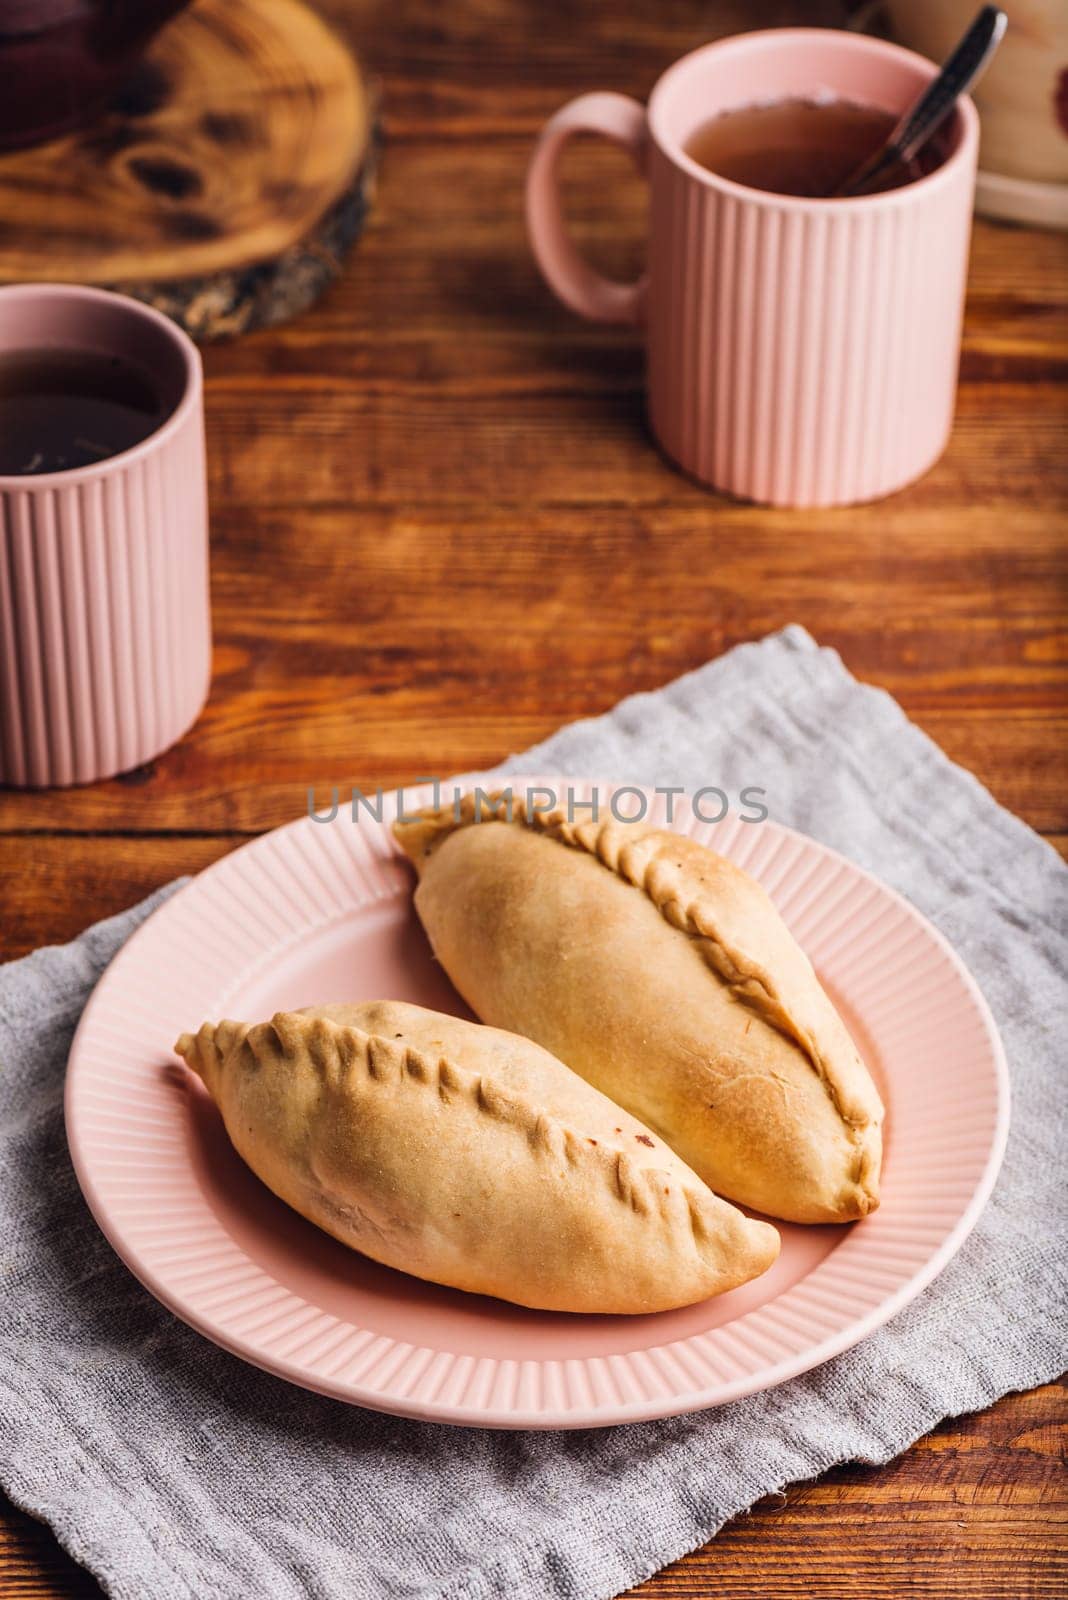 Two Homemade Cabbage Mini Pies on Plate and Mugs with Tea